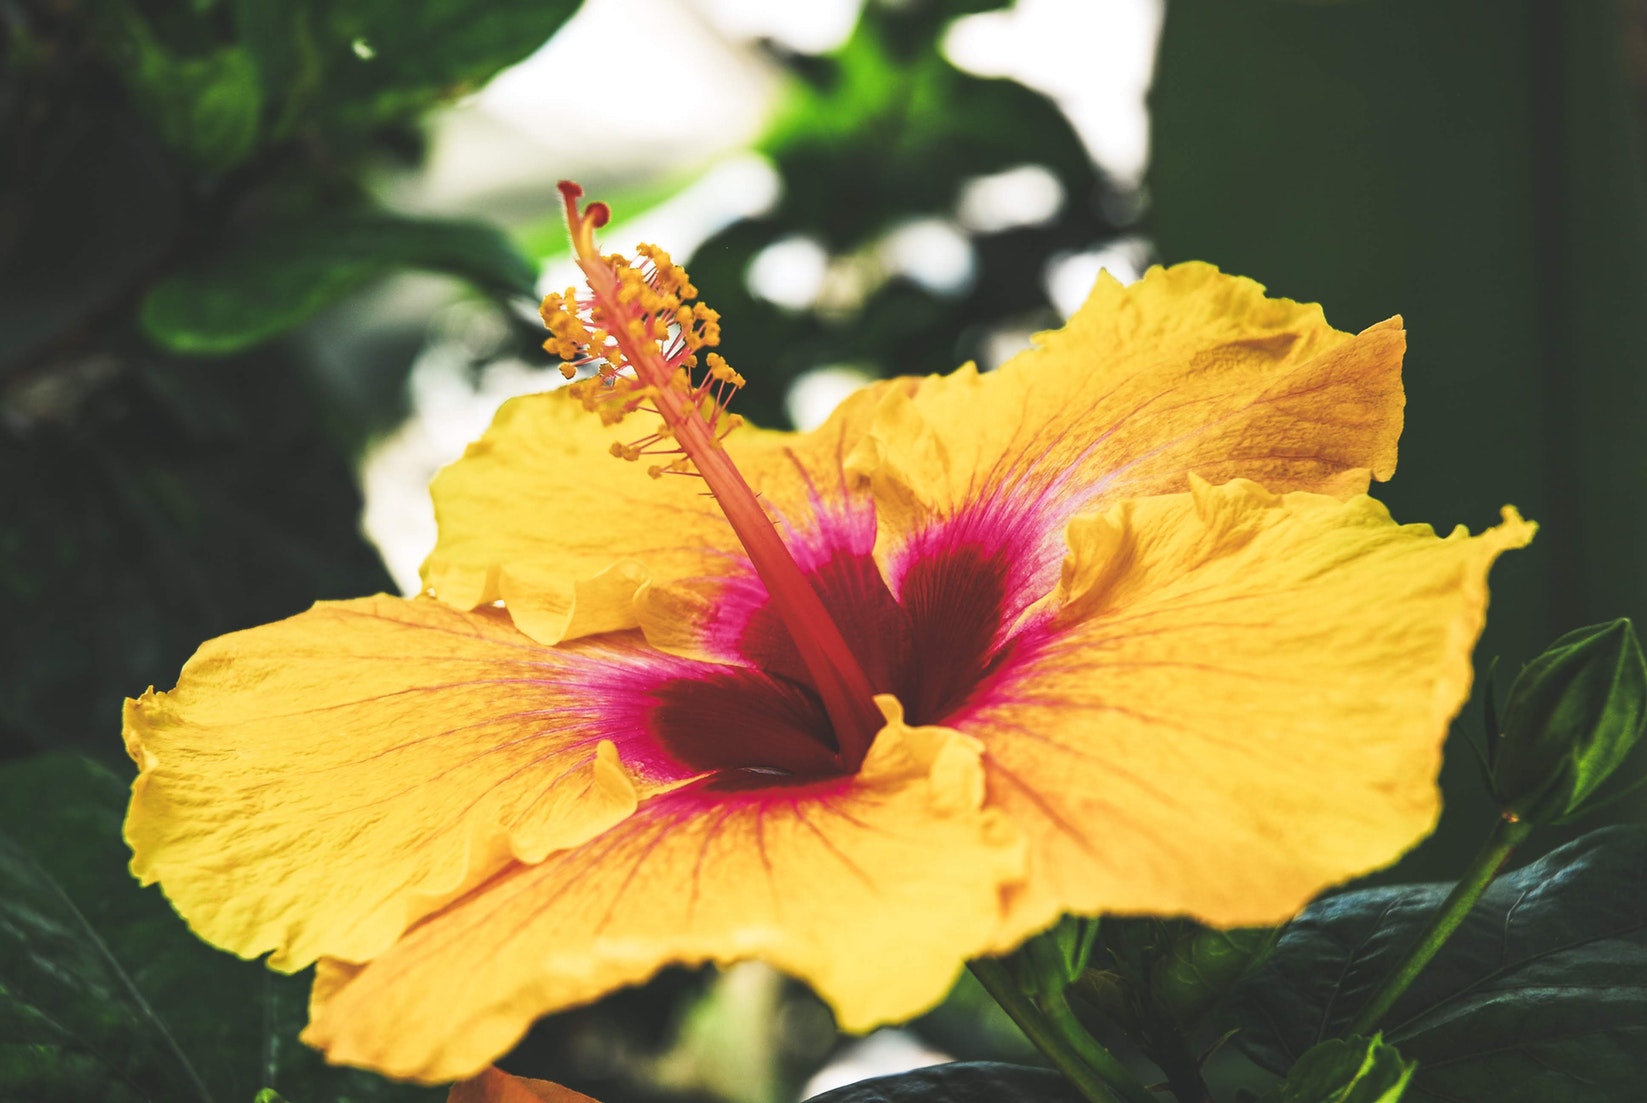 Hibiscus: Benefits, Side Effects, and More